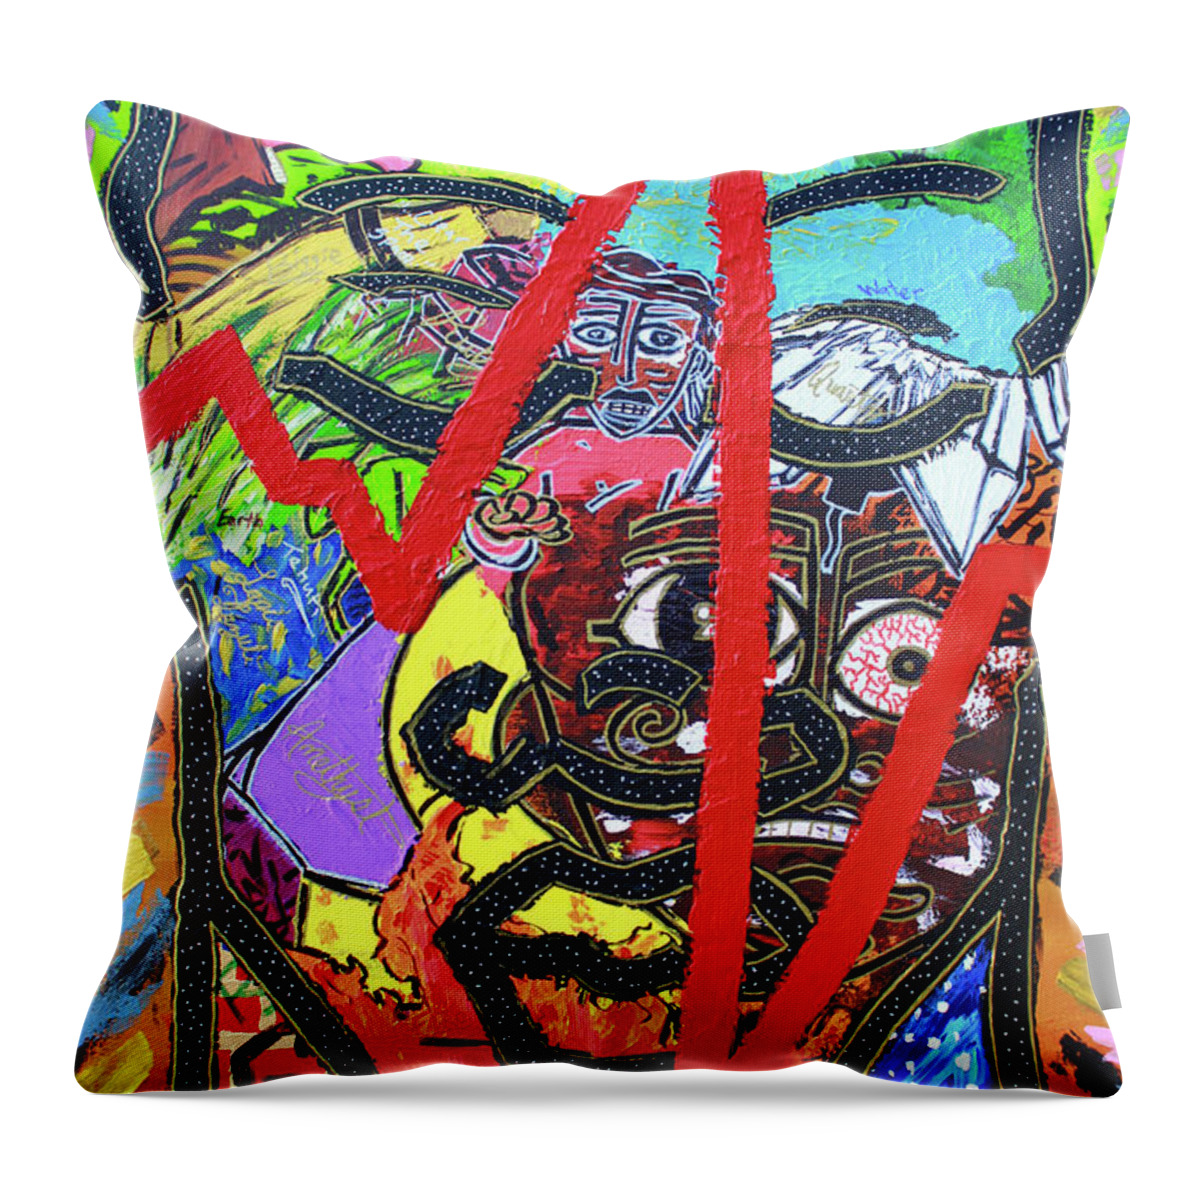 Abstract Throw Pillow featuring the painting Untitled by Odalo Wasikhongo